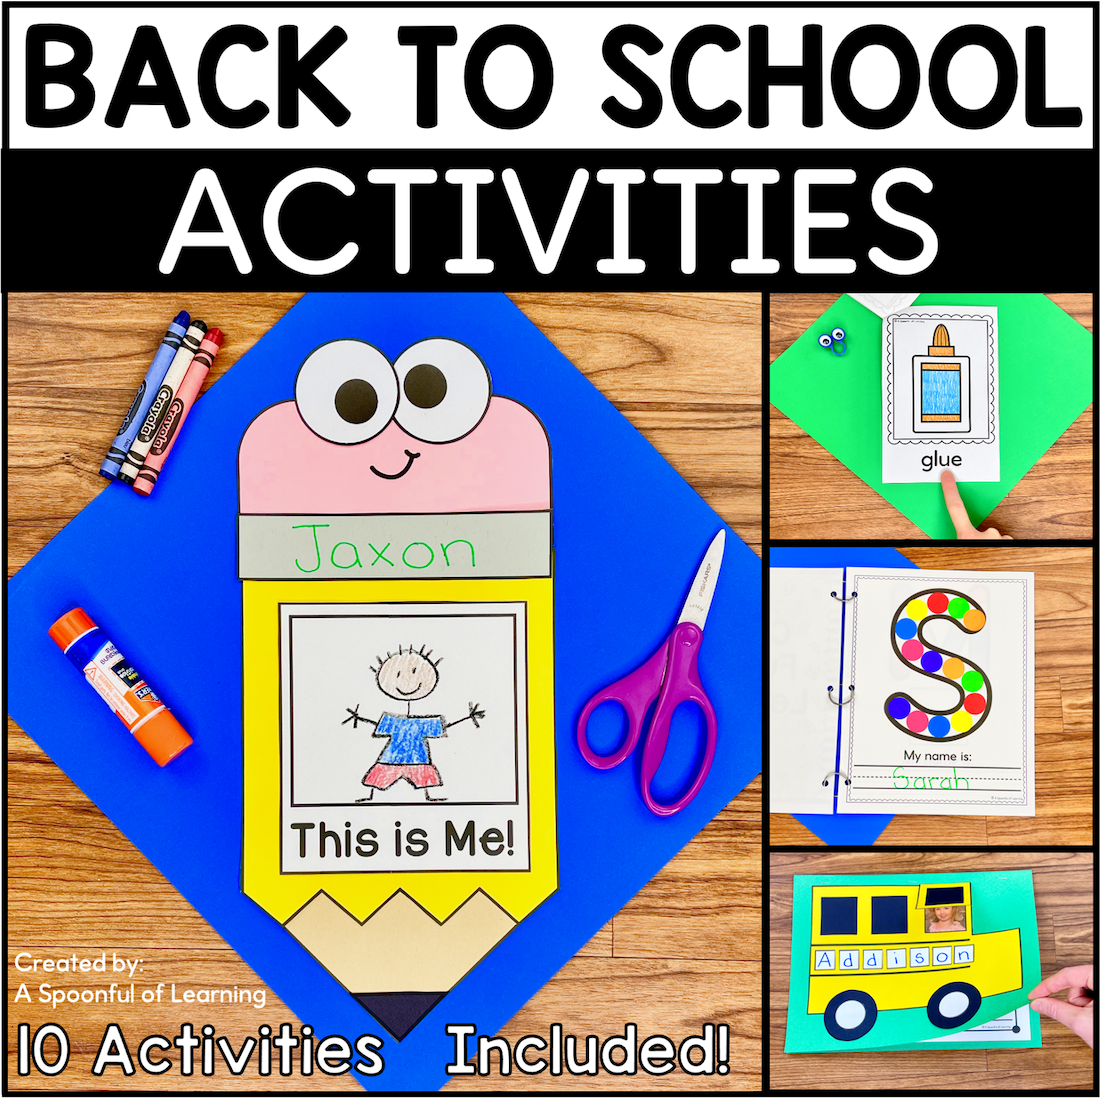 Back to School Fun! Activities for Kindergarten! - A Spoonful of Learning